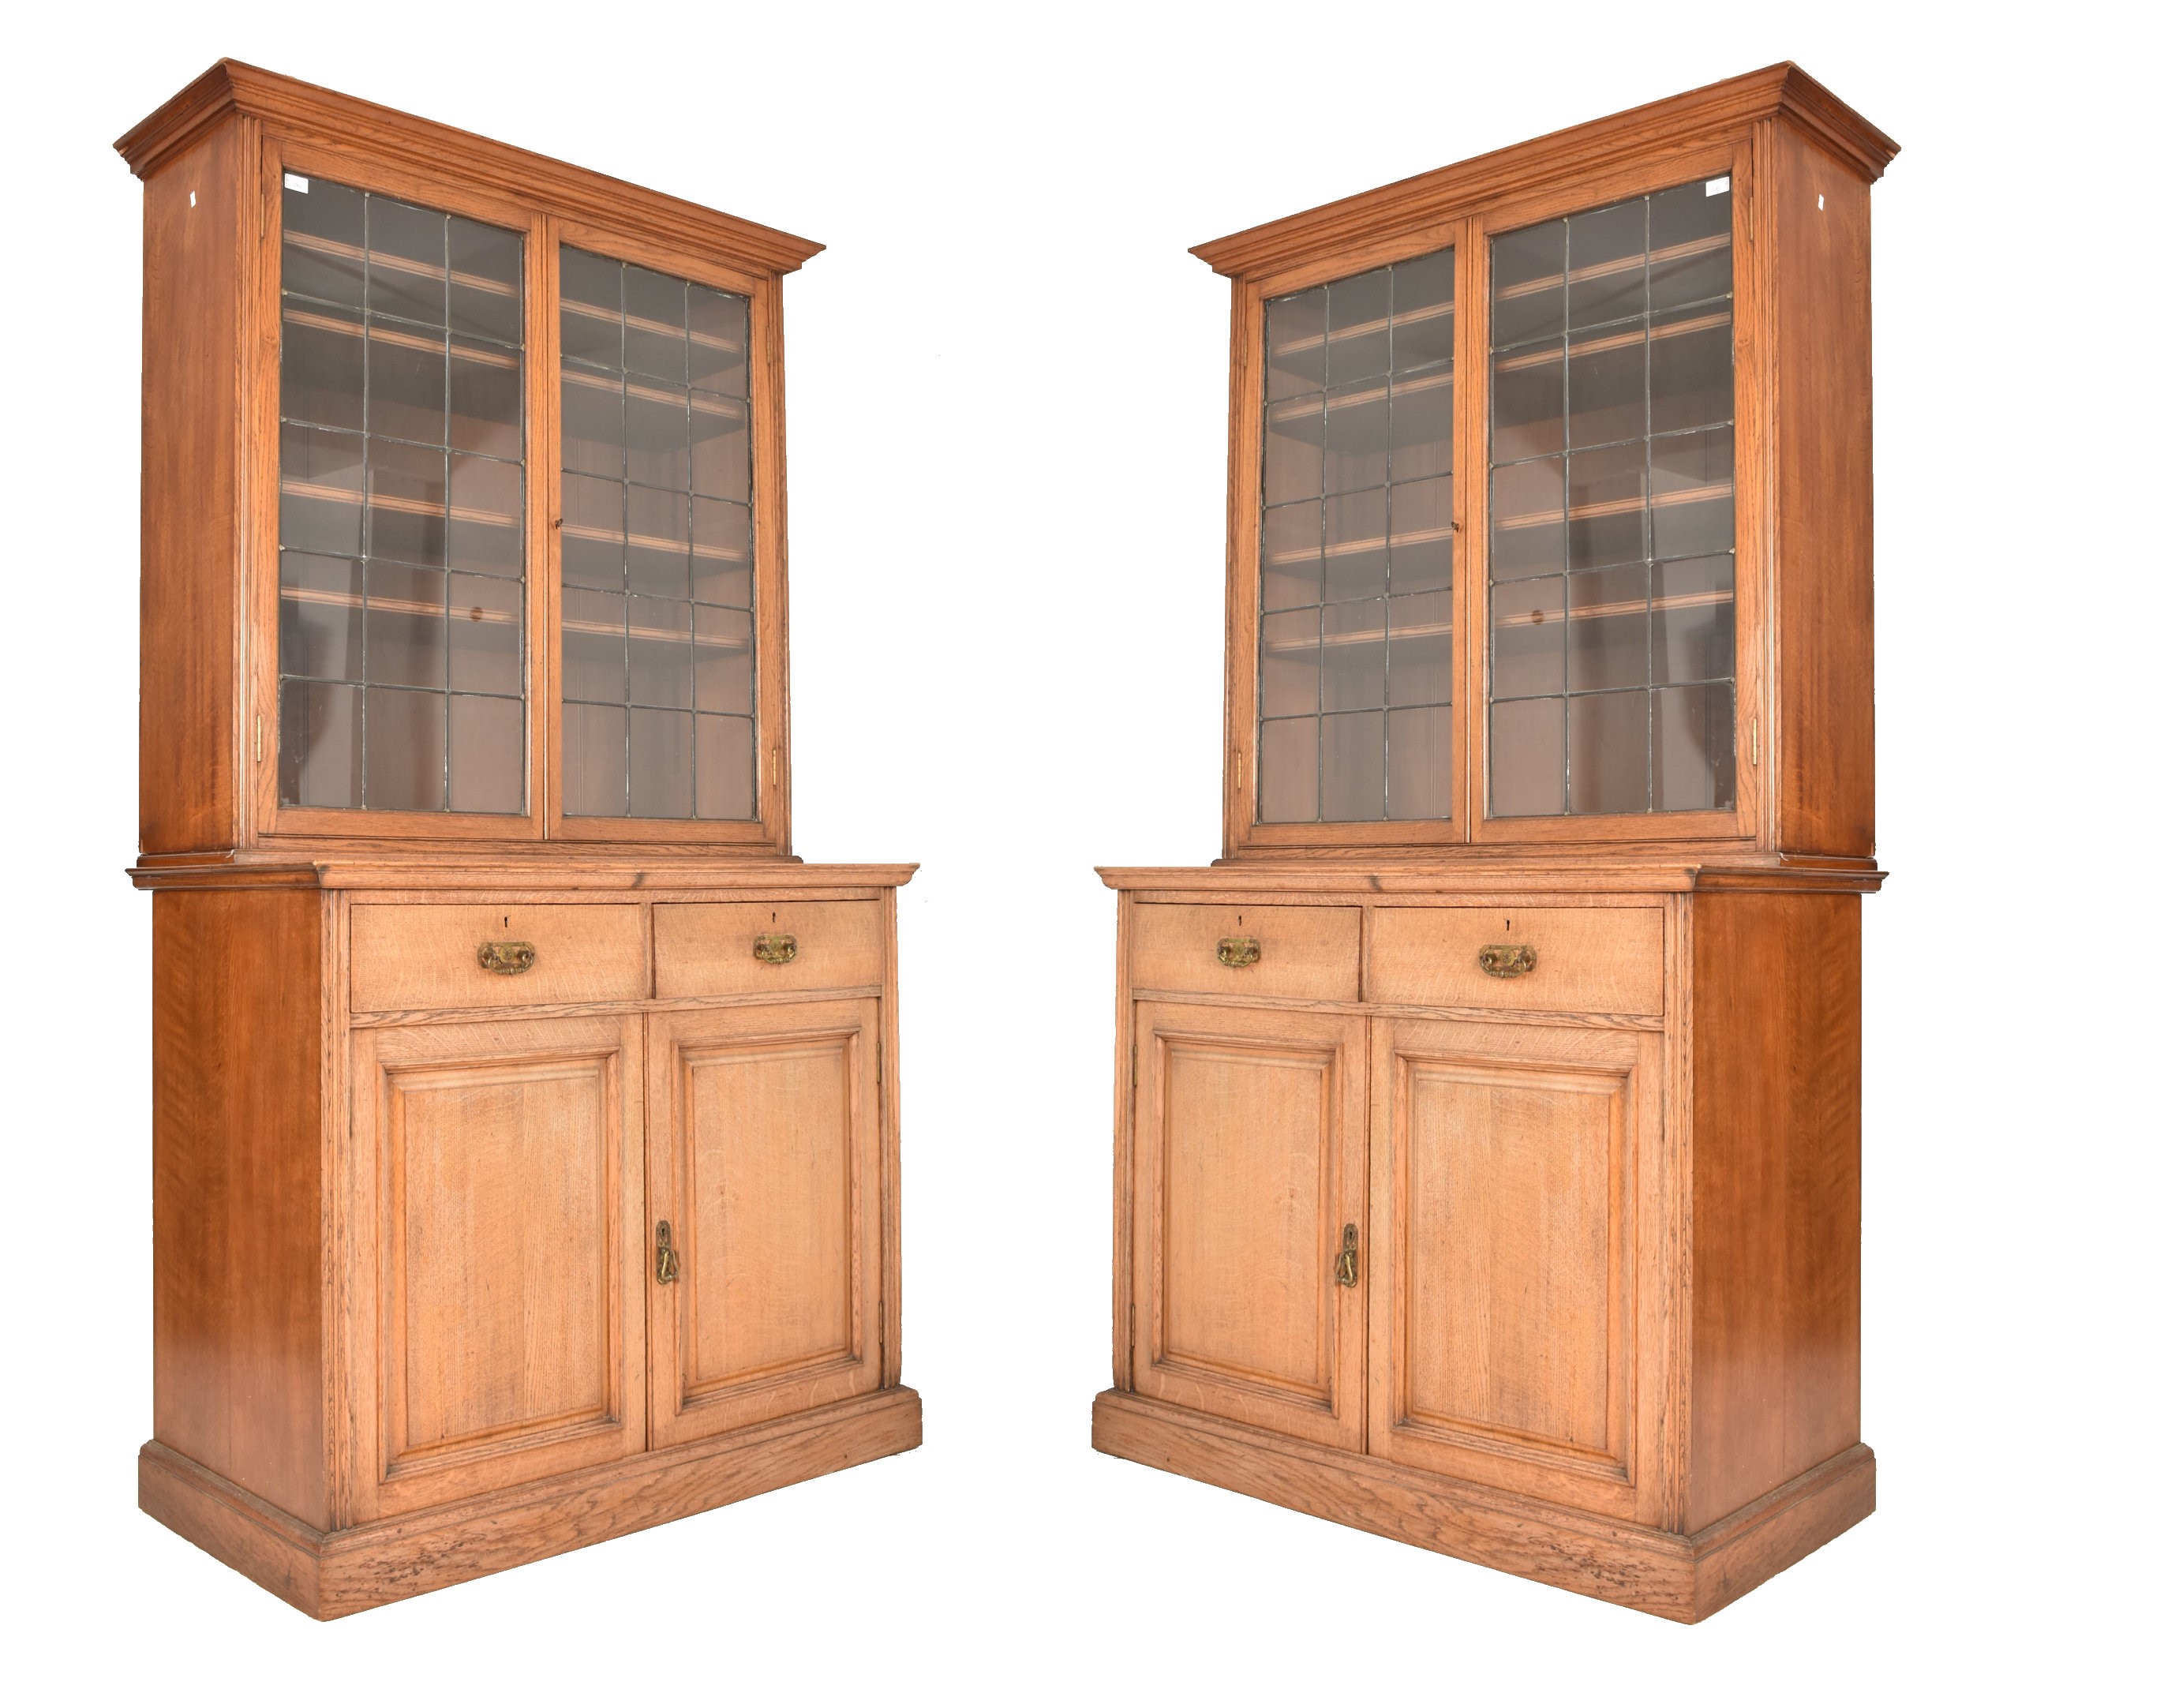 PAIR OF LATE 19TH CENTURY VICTORIAN OAK LIBRARY BOOKCASES